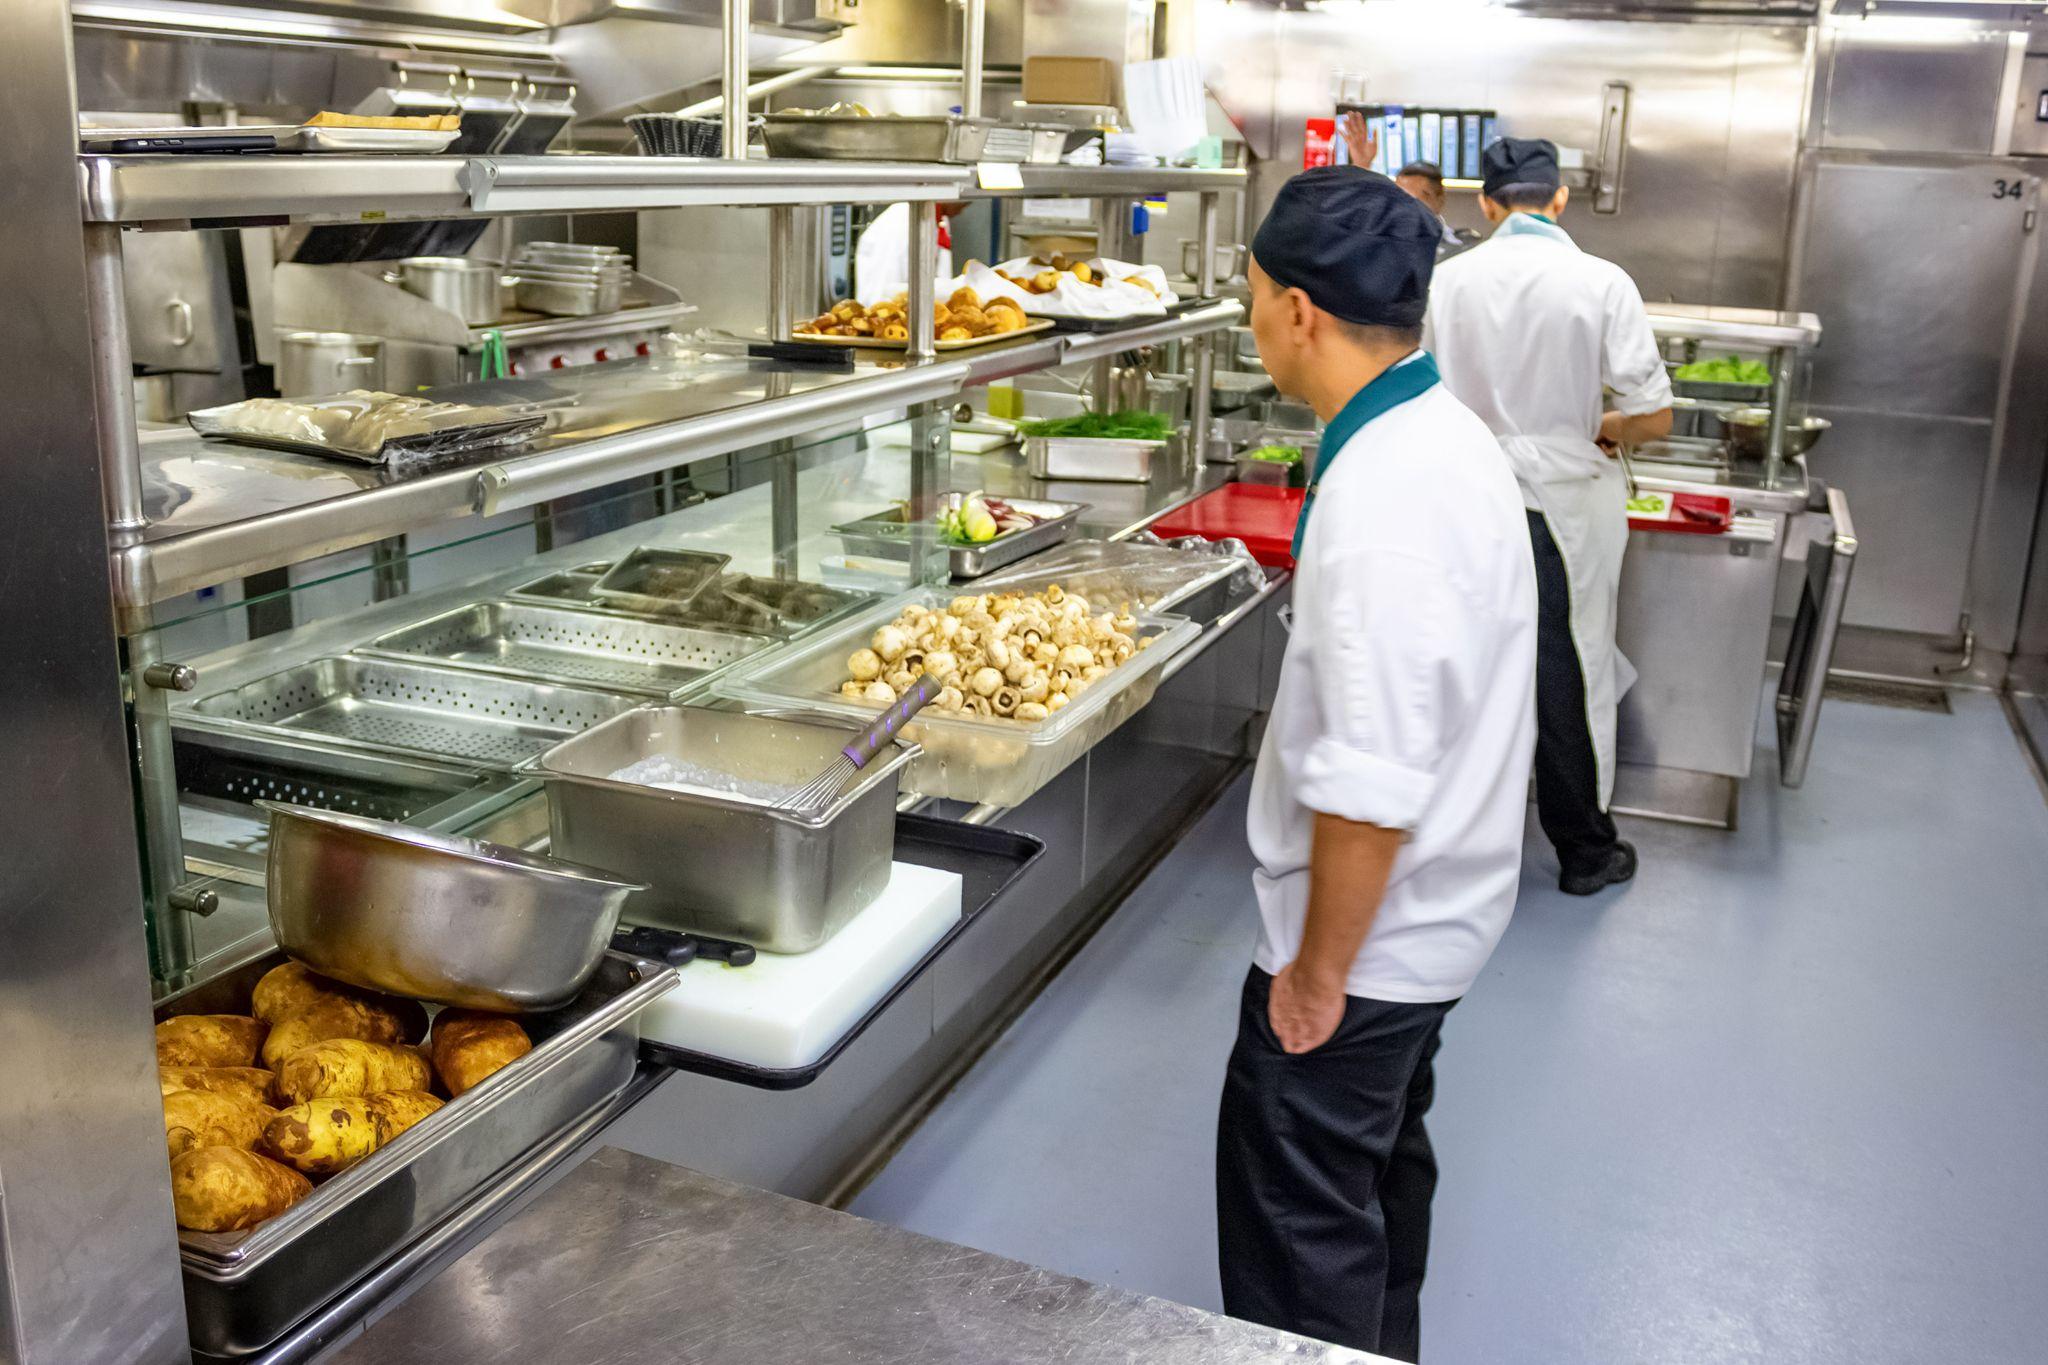 Kitchen crew work in the galley of a cruise ship